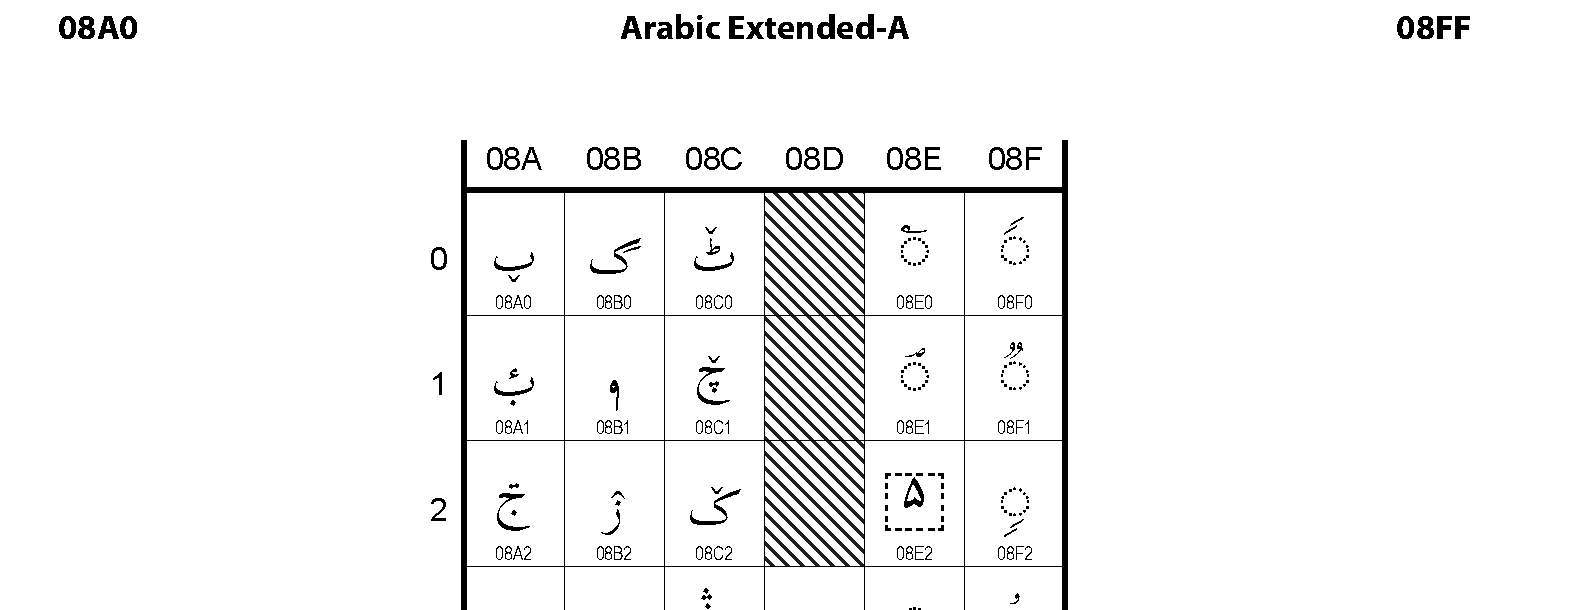 Unicode - Arabic Extended-A